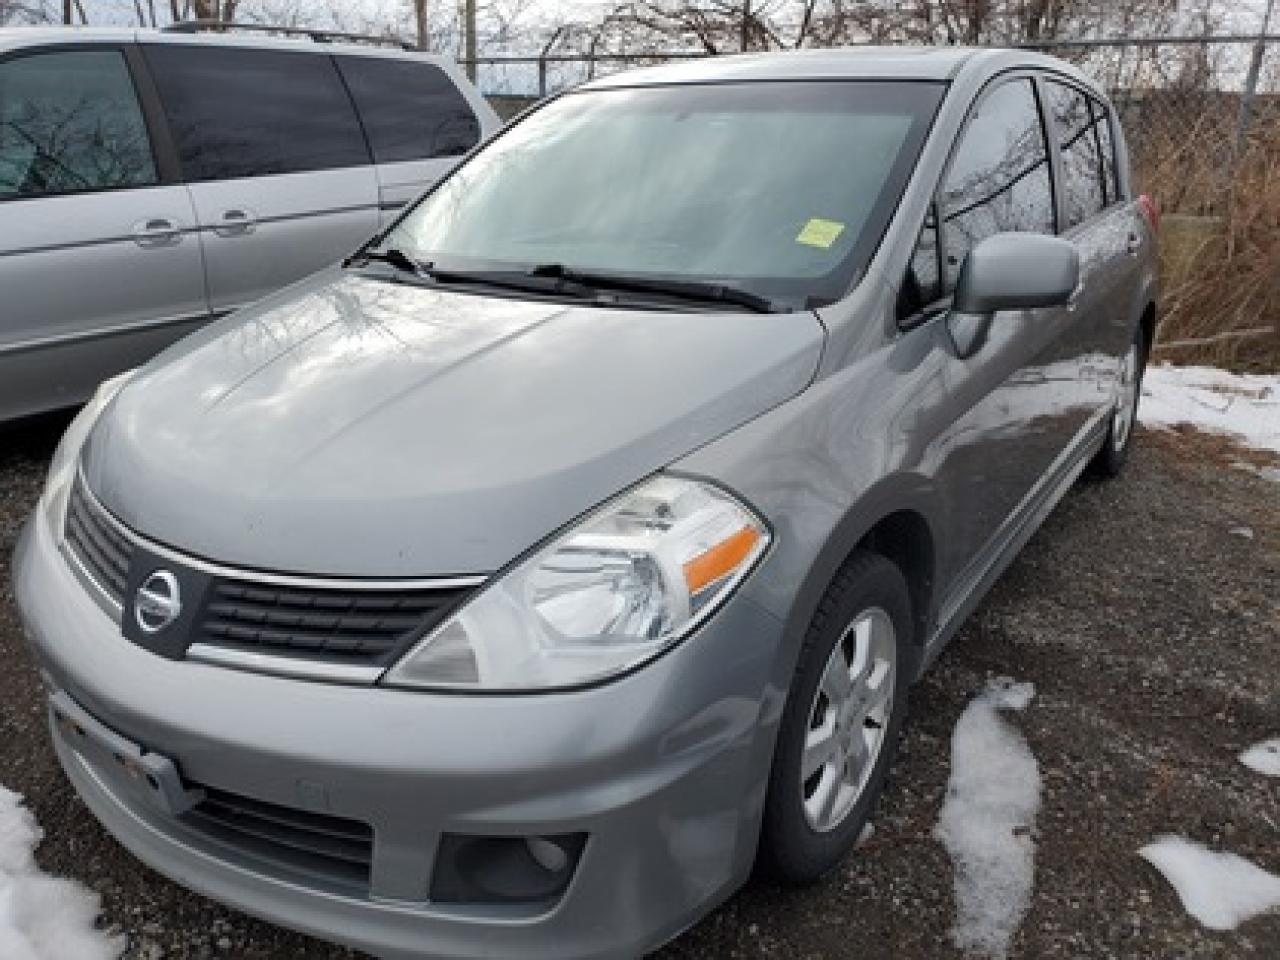 Used 2008 Nissan Versa 5dr Hb I4 Man 1 8 Sl For Sale In